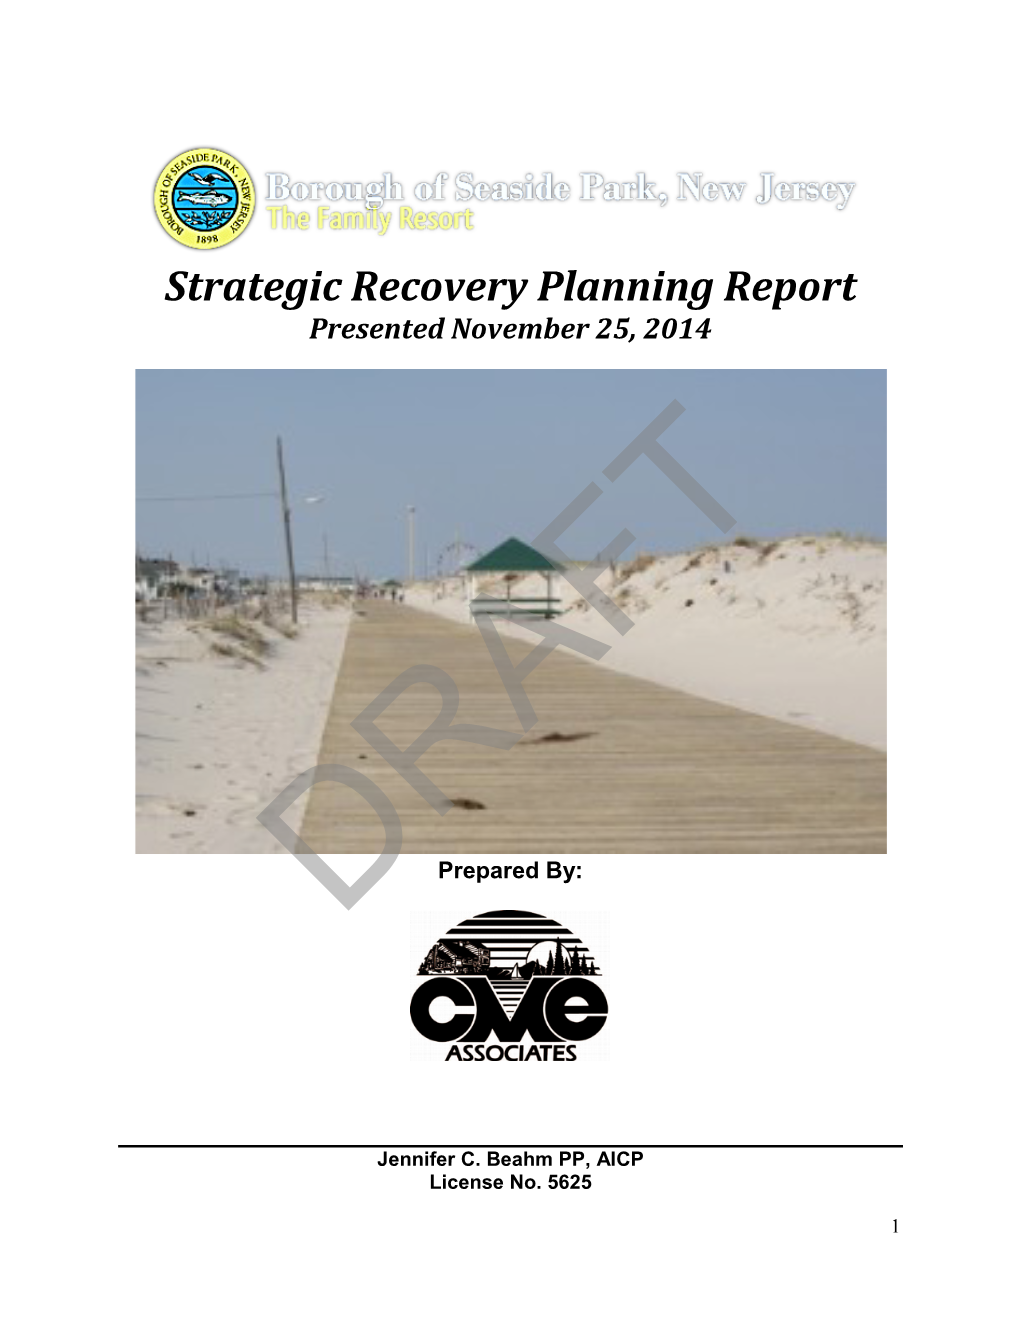 Strategic Recovery Planning Report Presented November 25, 2014